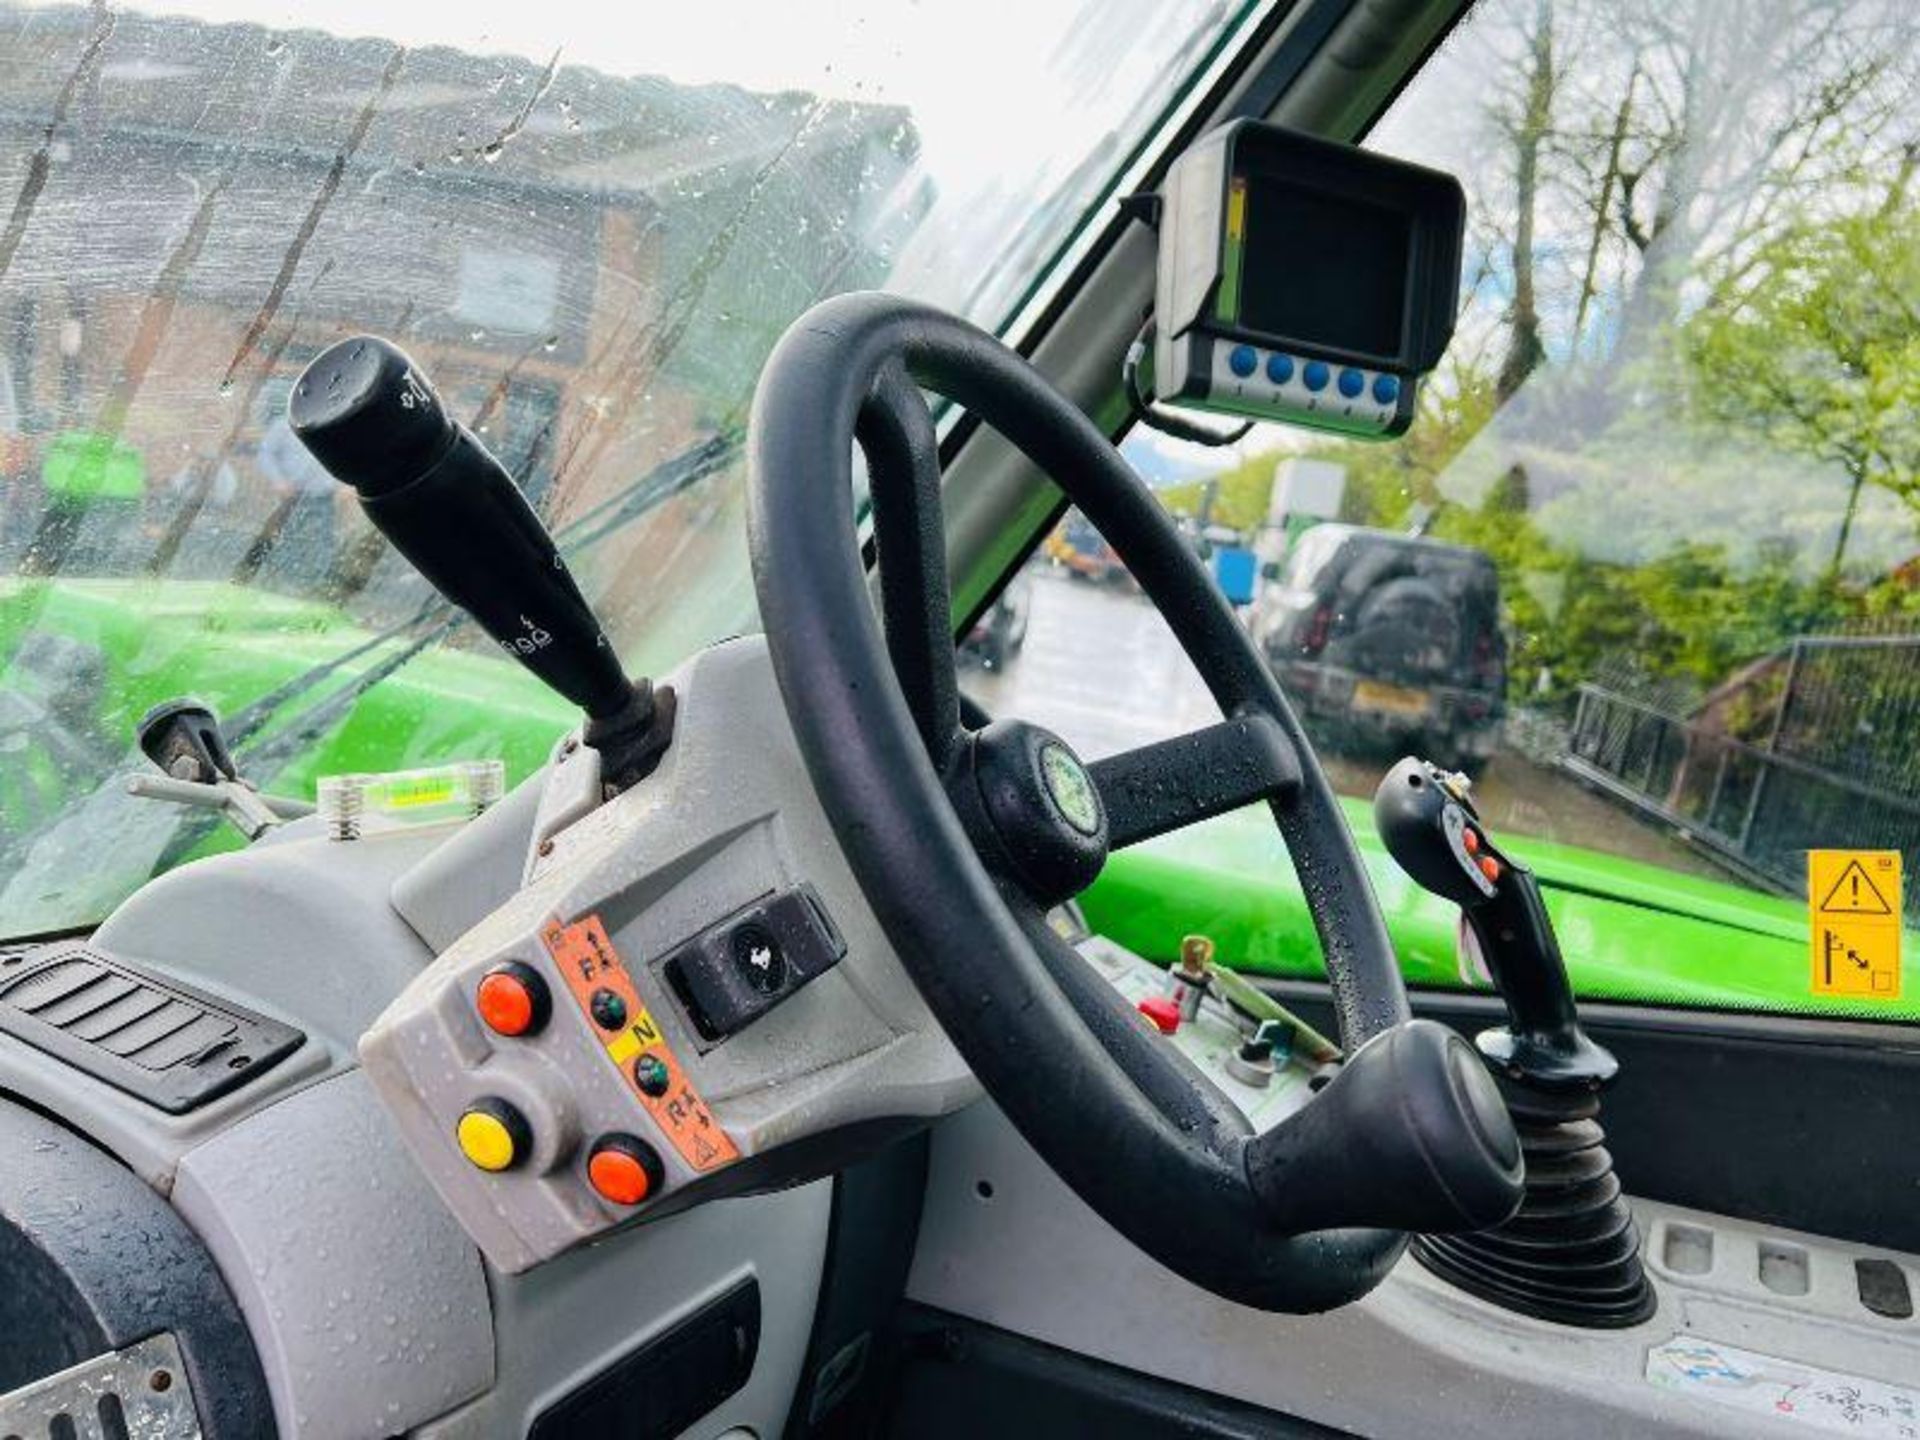 MERLO P34.7 4WD TELEHANDLER*YEAR 2013, AG SPEC* C/W PICK UP HITCH - Image 13 of 20